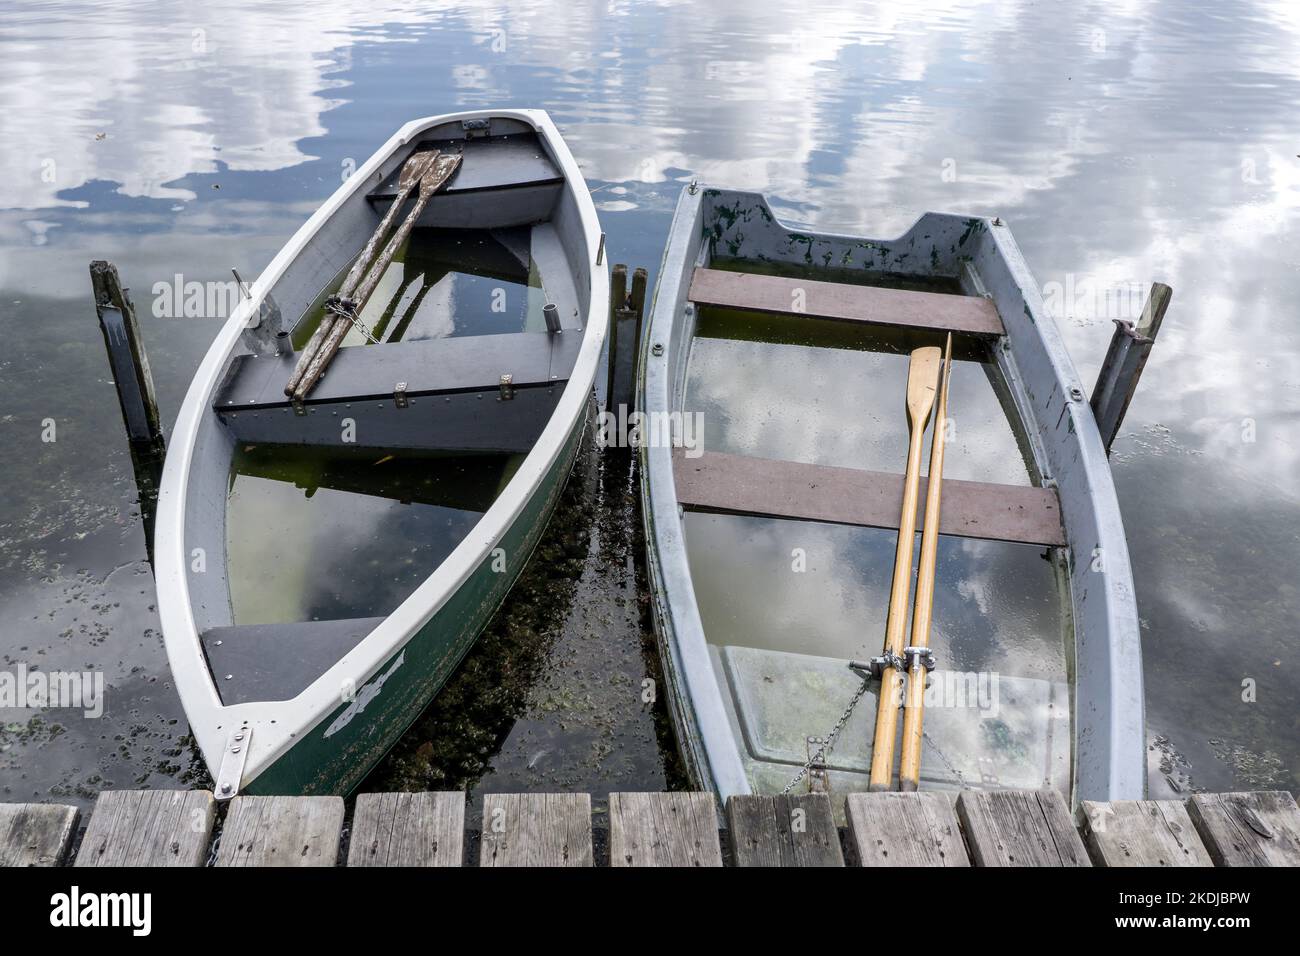 two small wrecked row boats full of water on a lake Stock Photo